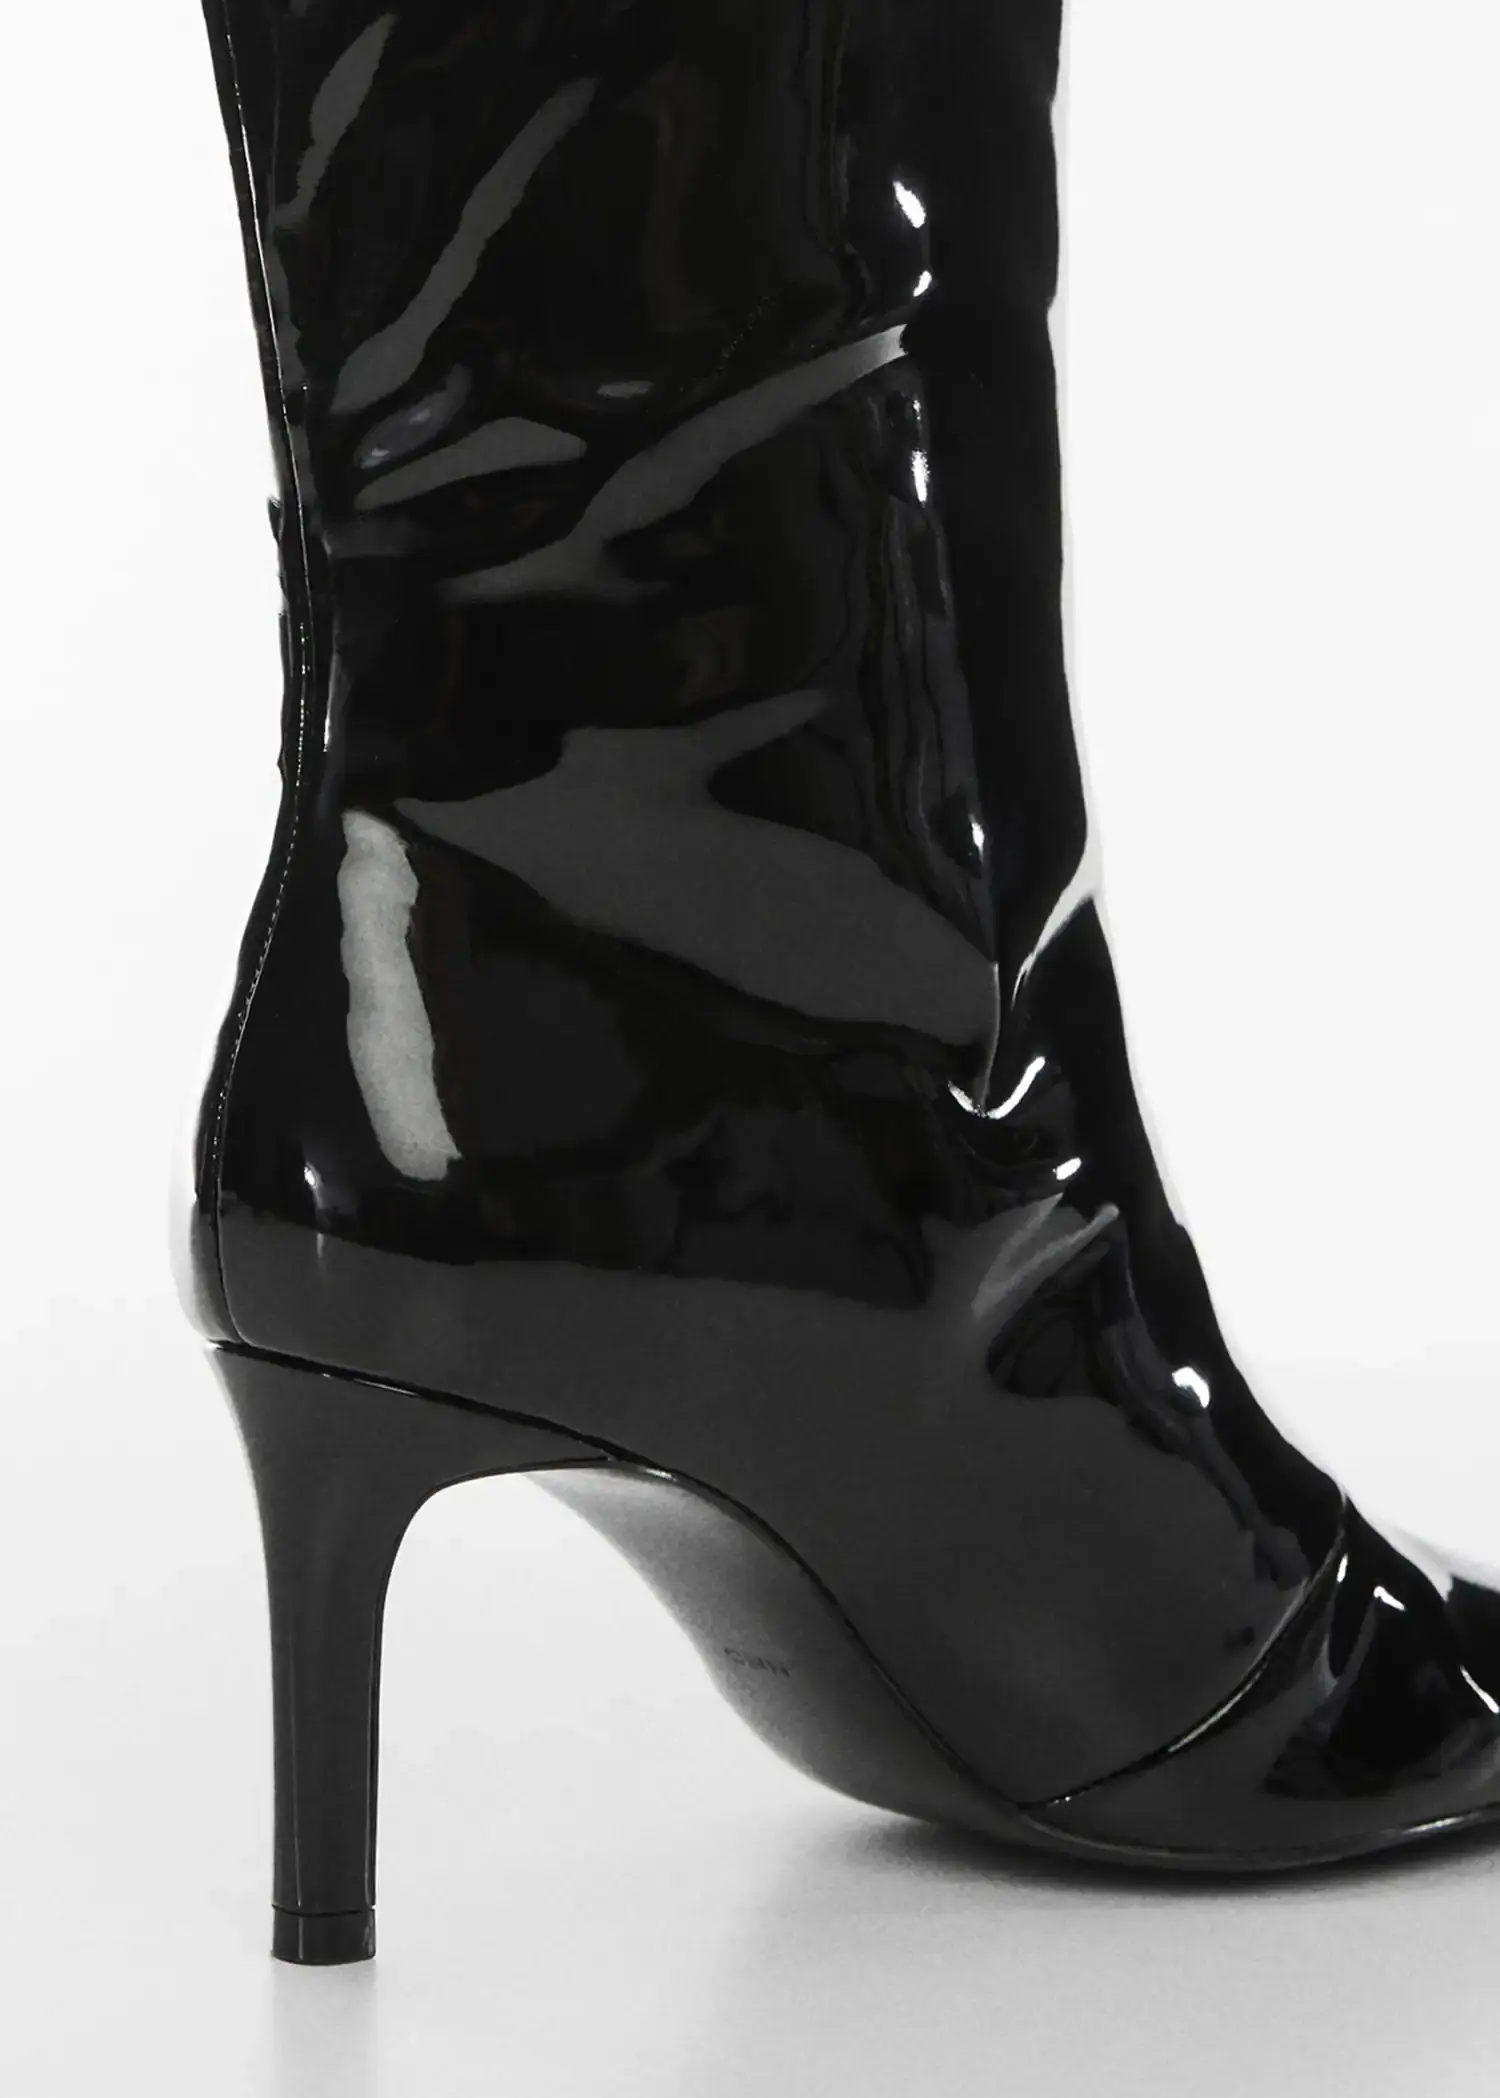 Mango Patent leather-effect heeled boots. 3